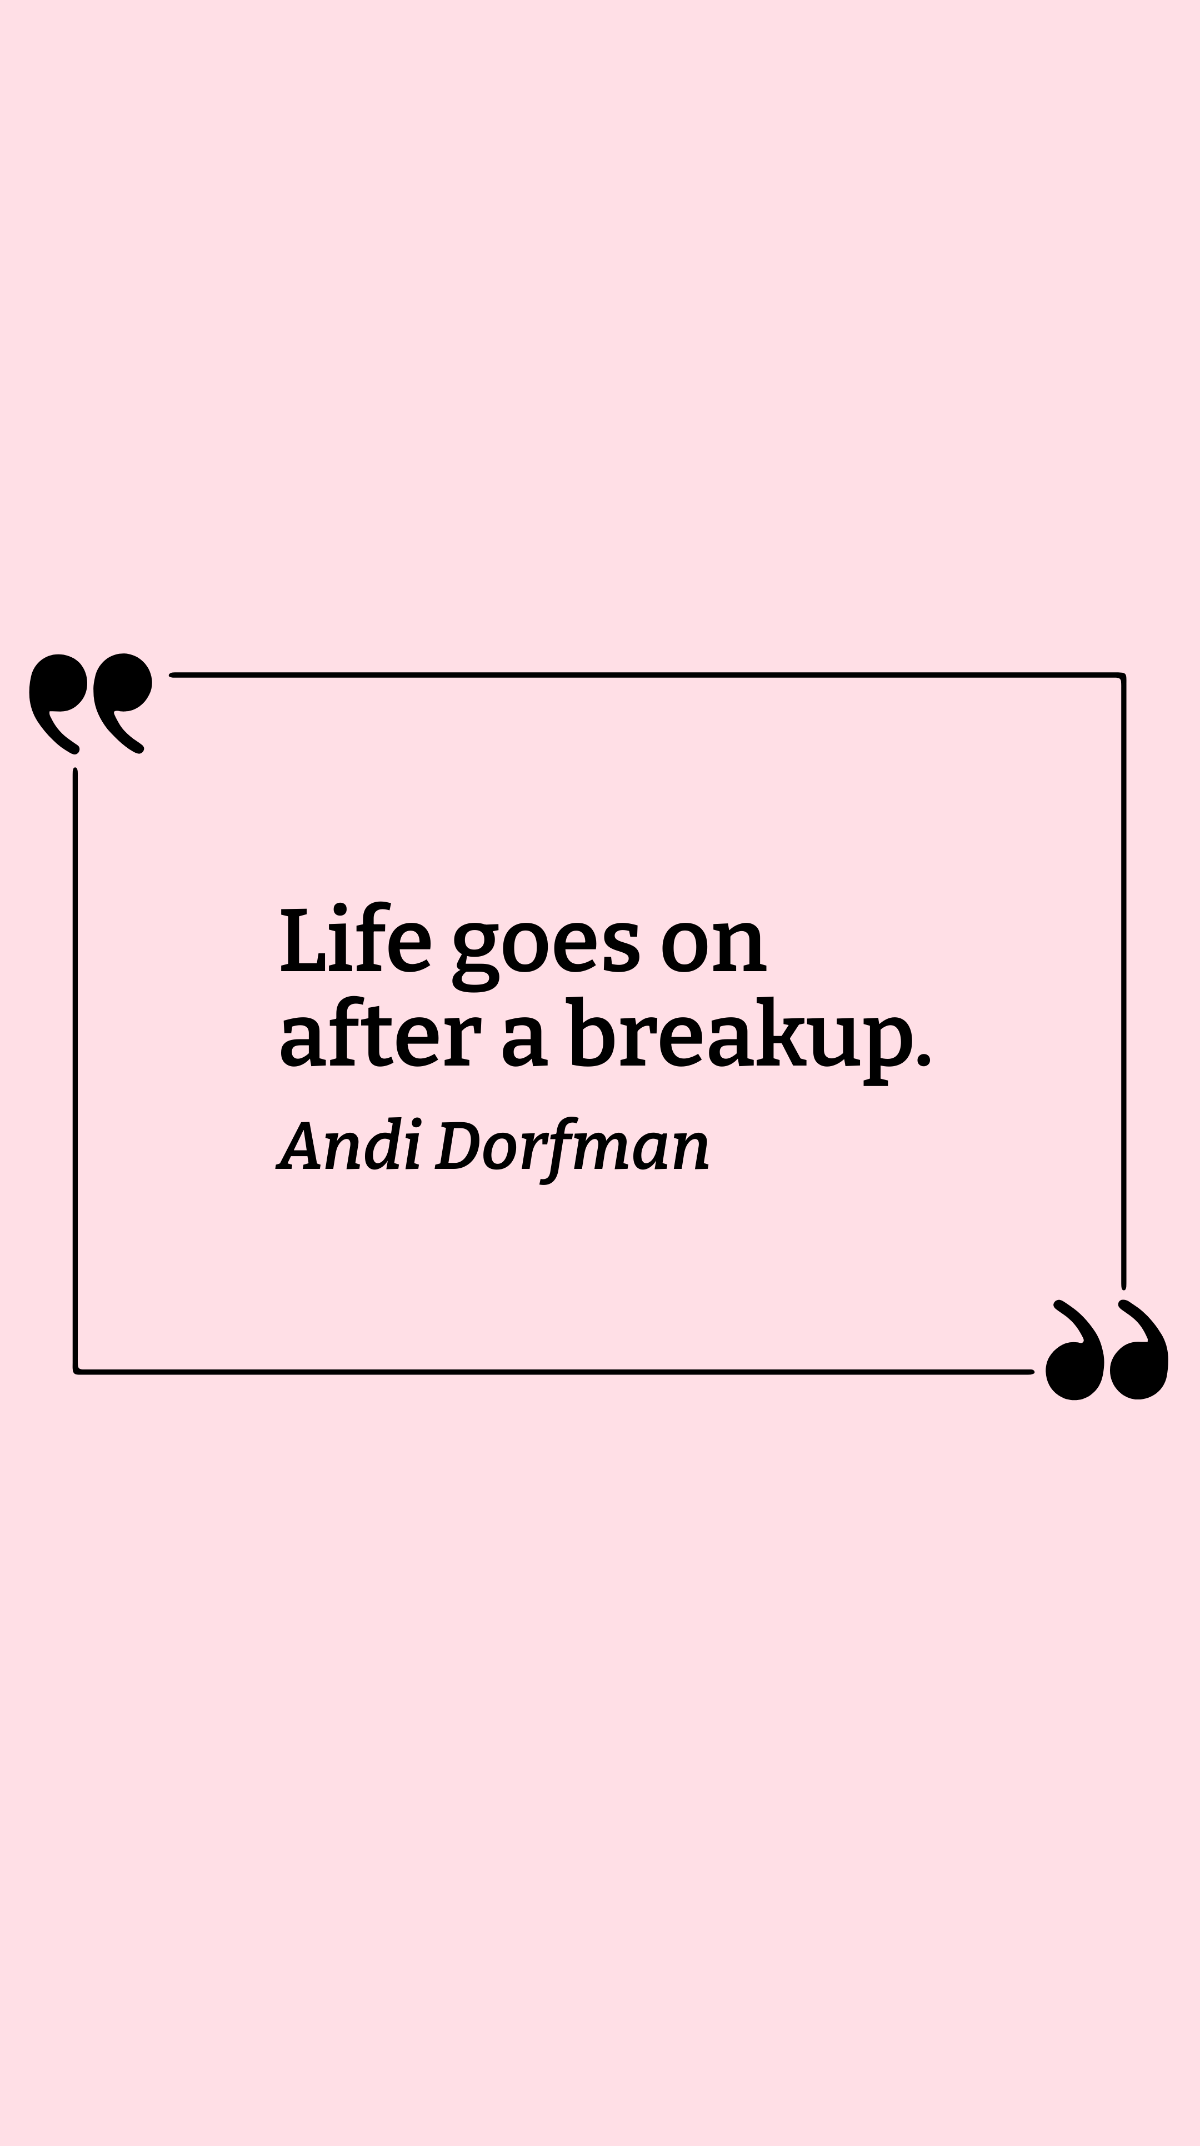 Andi Dorfman - Life goes on after a breakup.